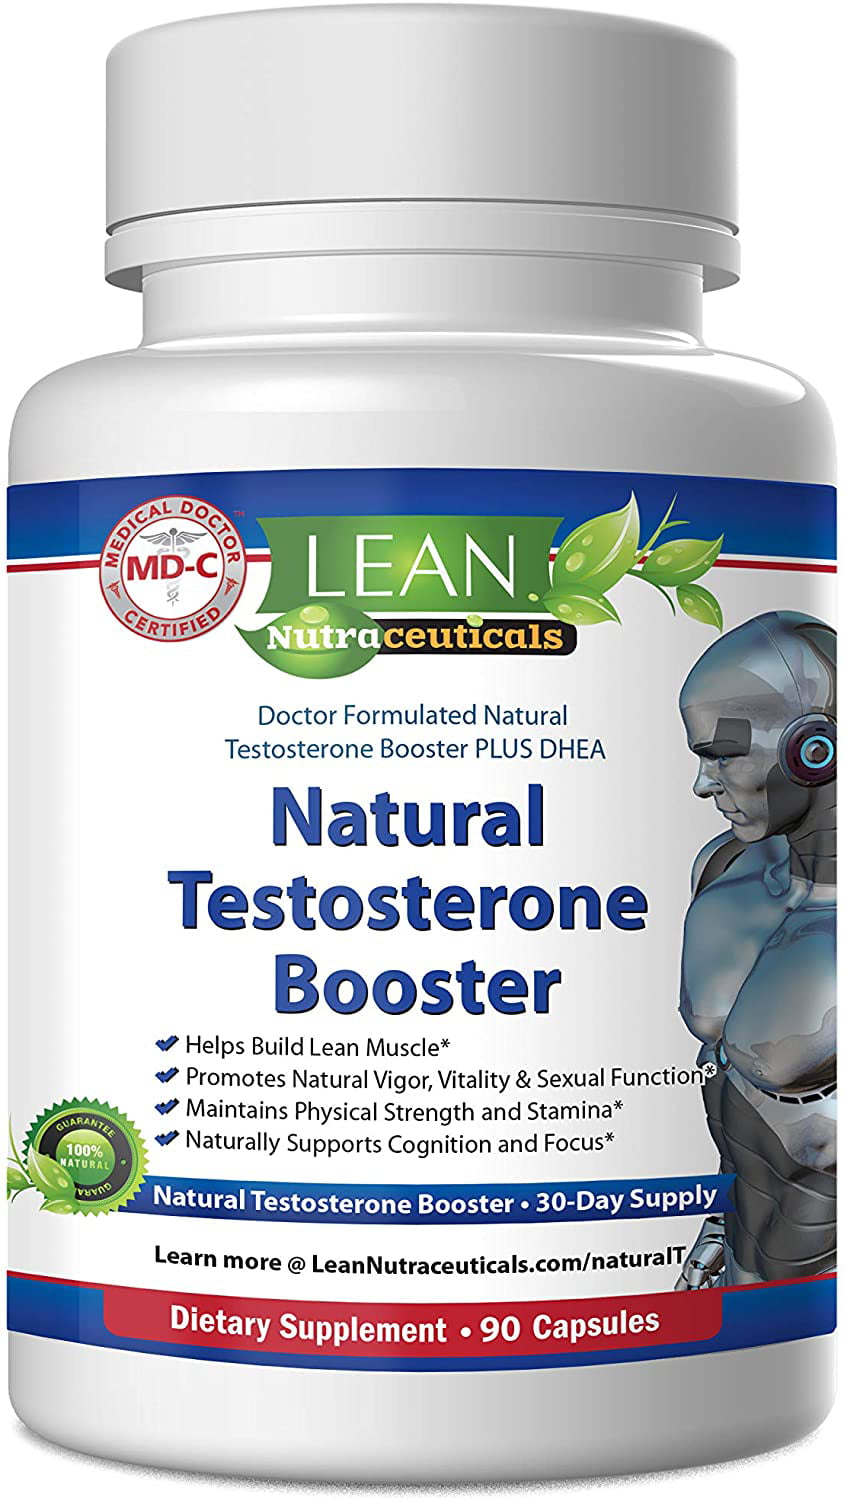 Booster herbal what natural testosterone the is best Ranking the